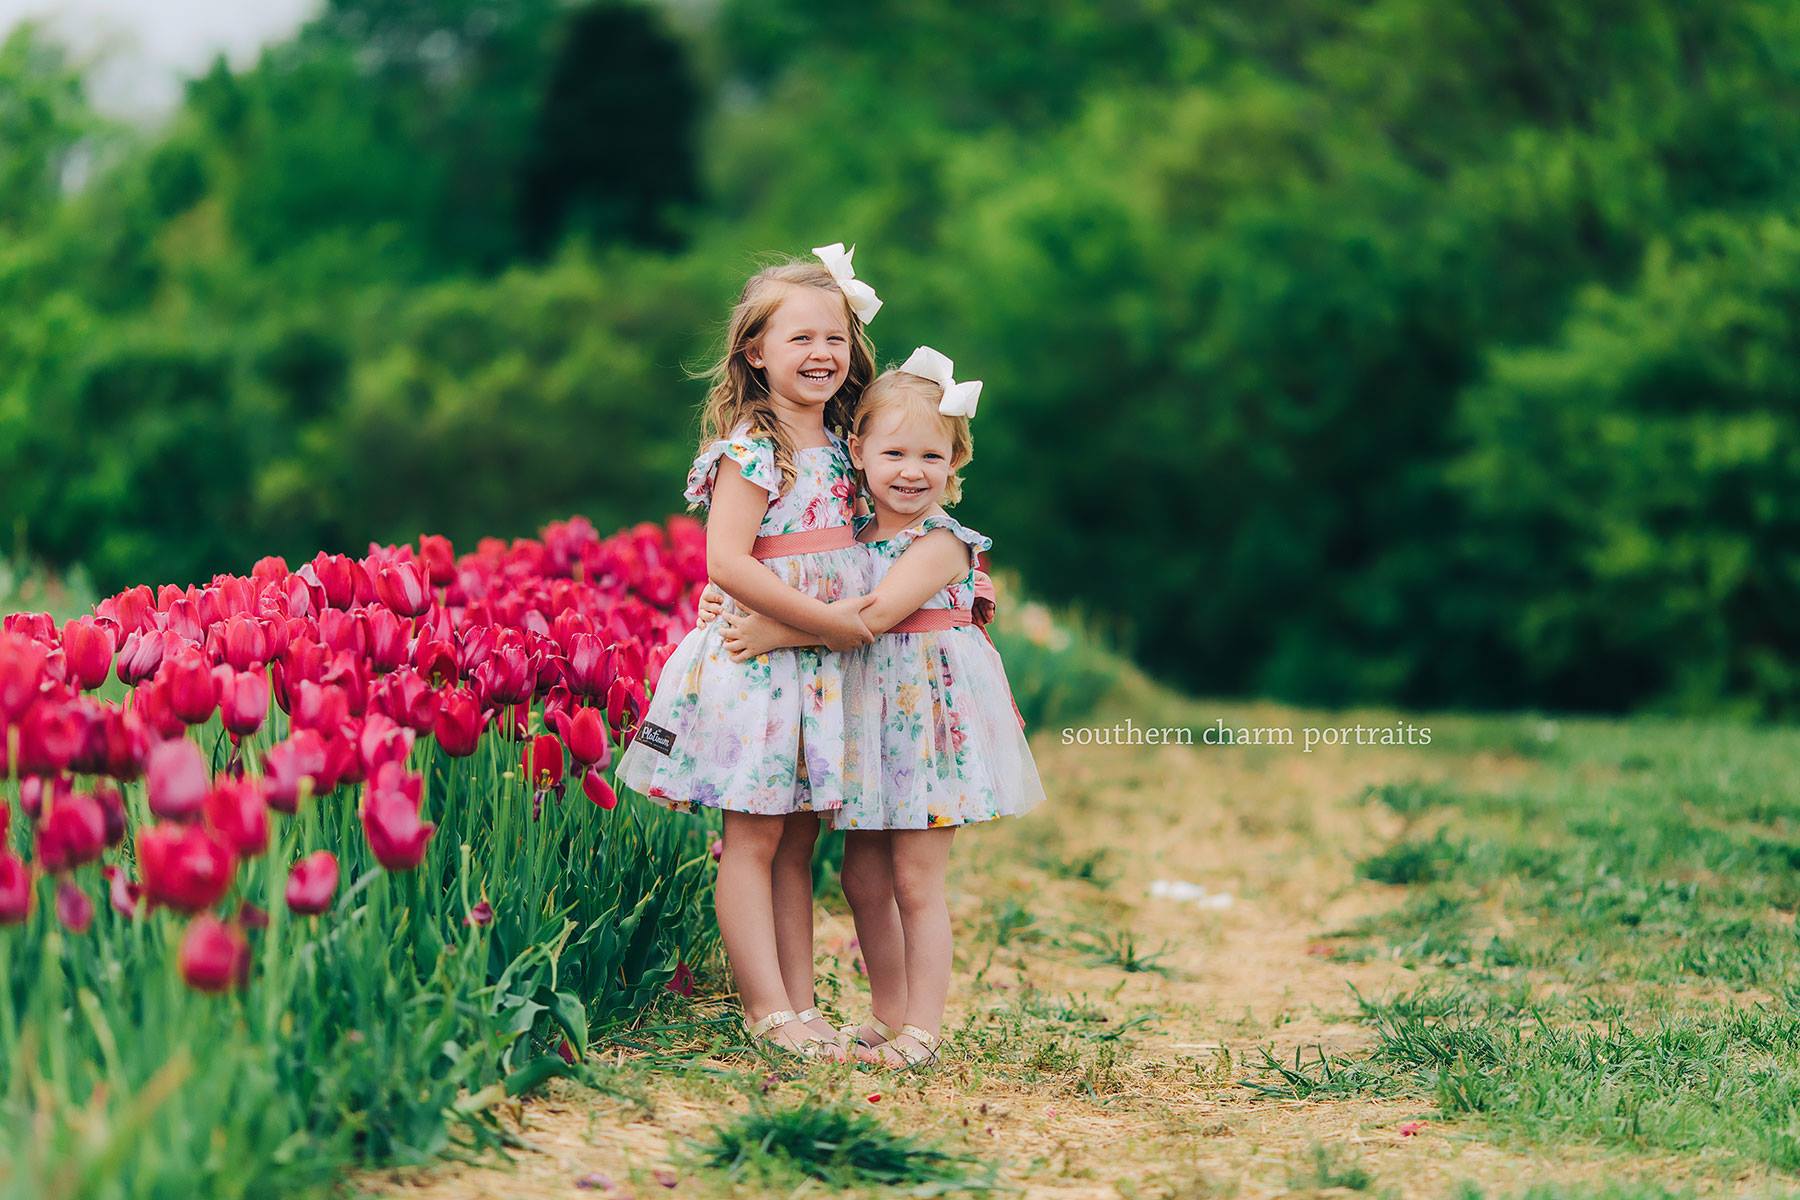 Outdoor Easter Portraits in Knoxville, TN - Spring 2019 Highlights